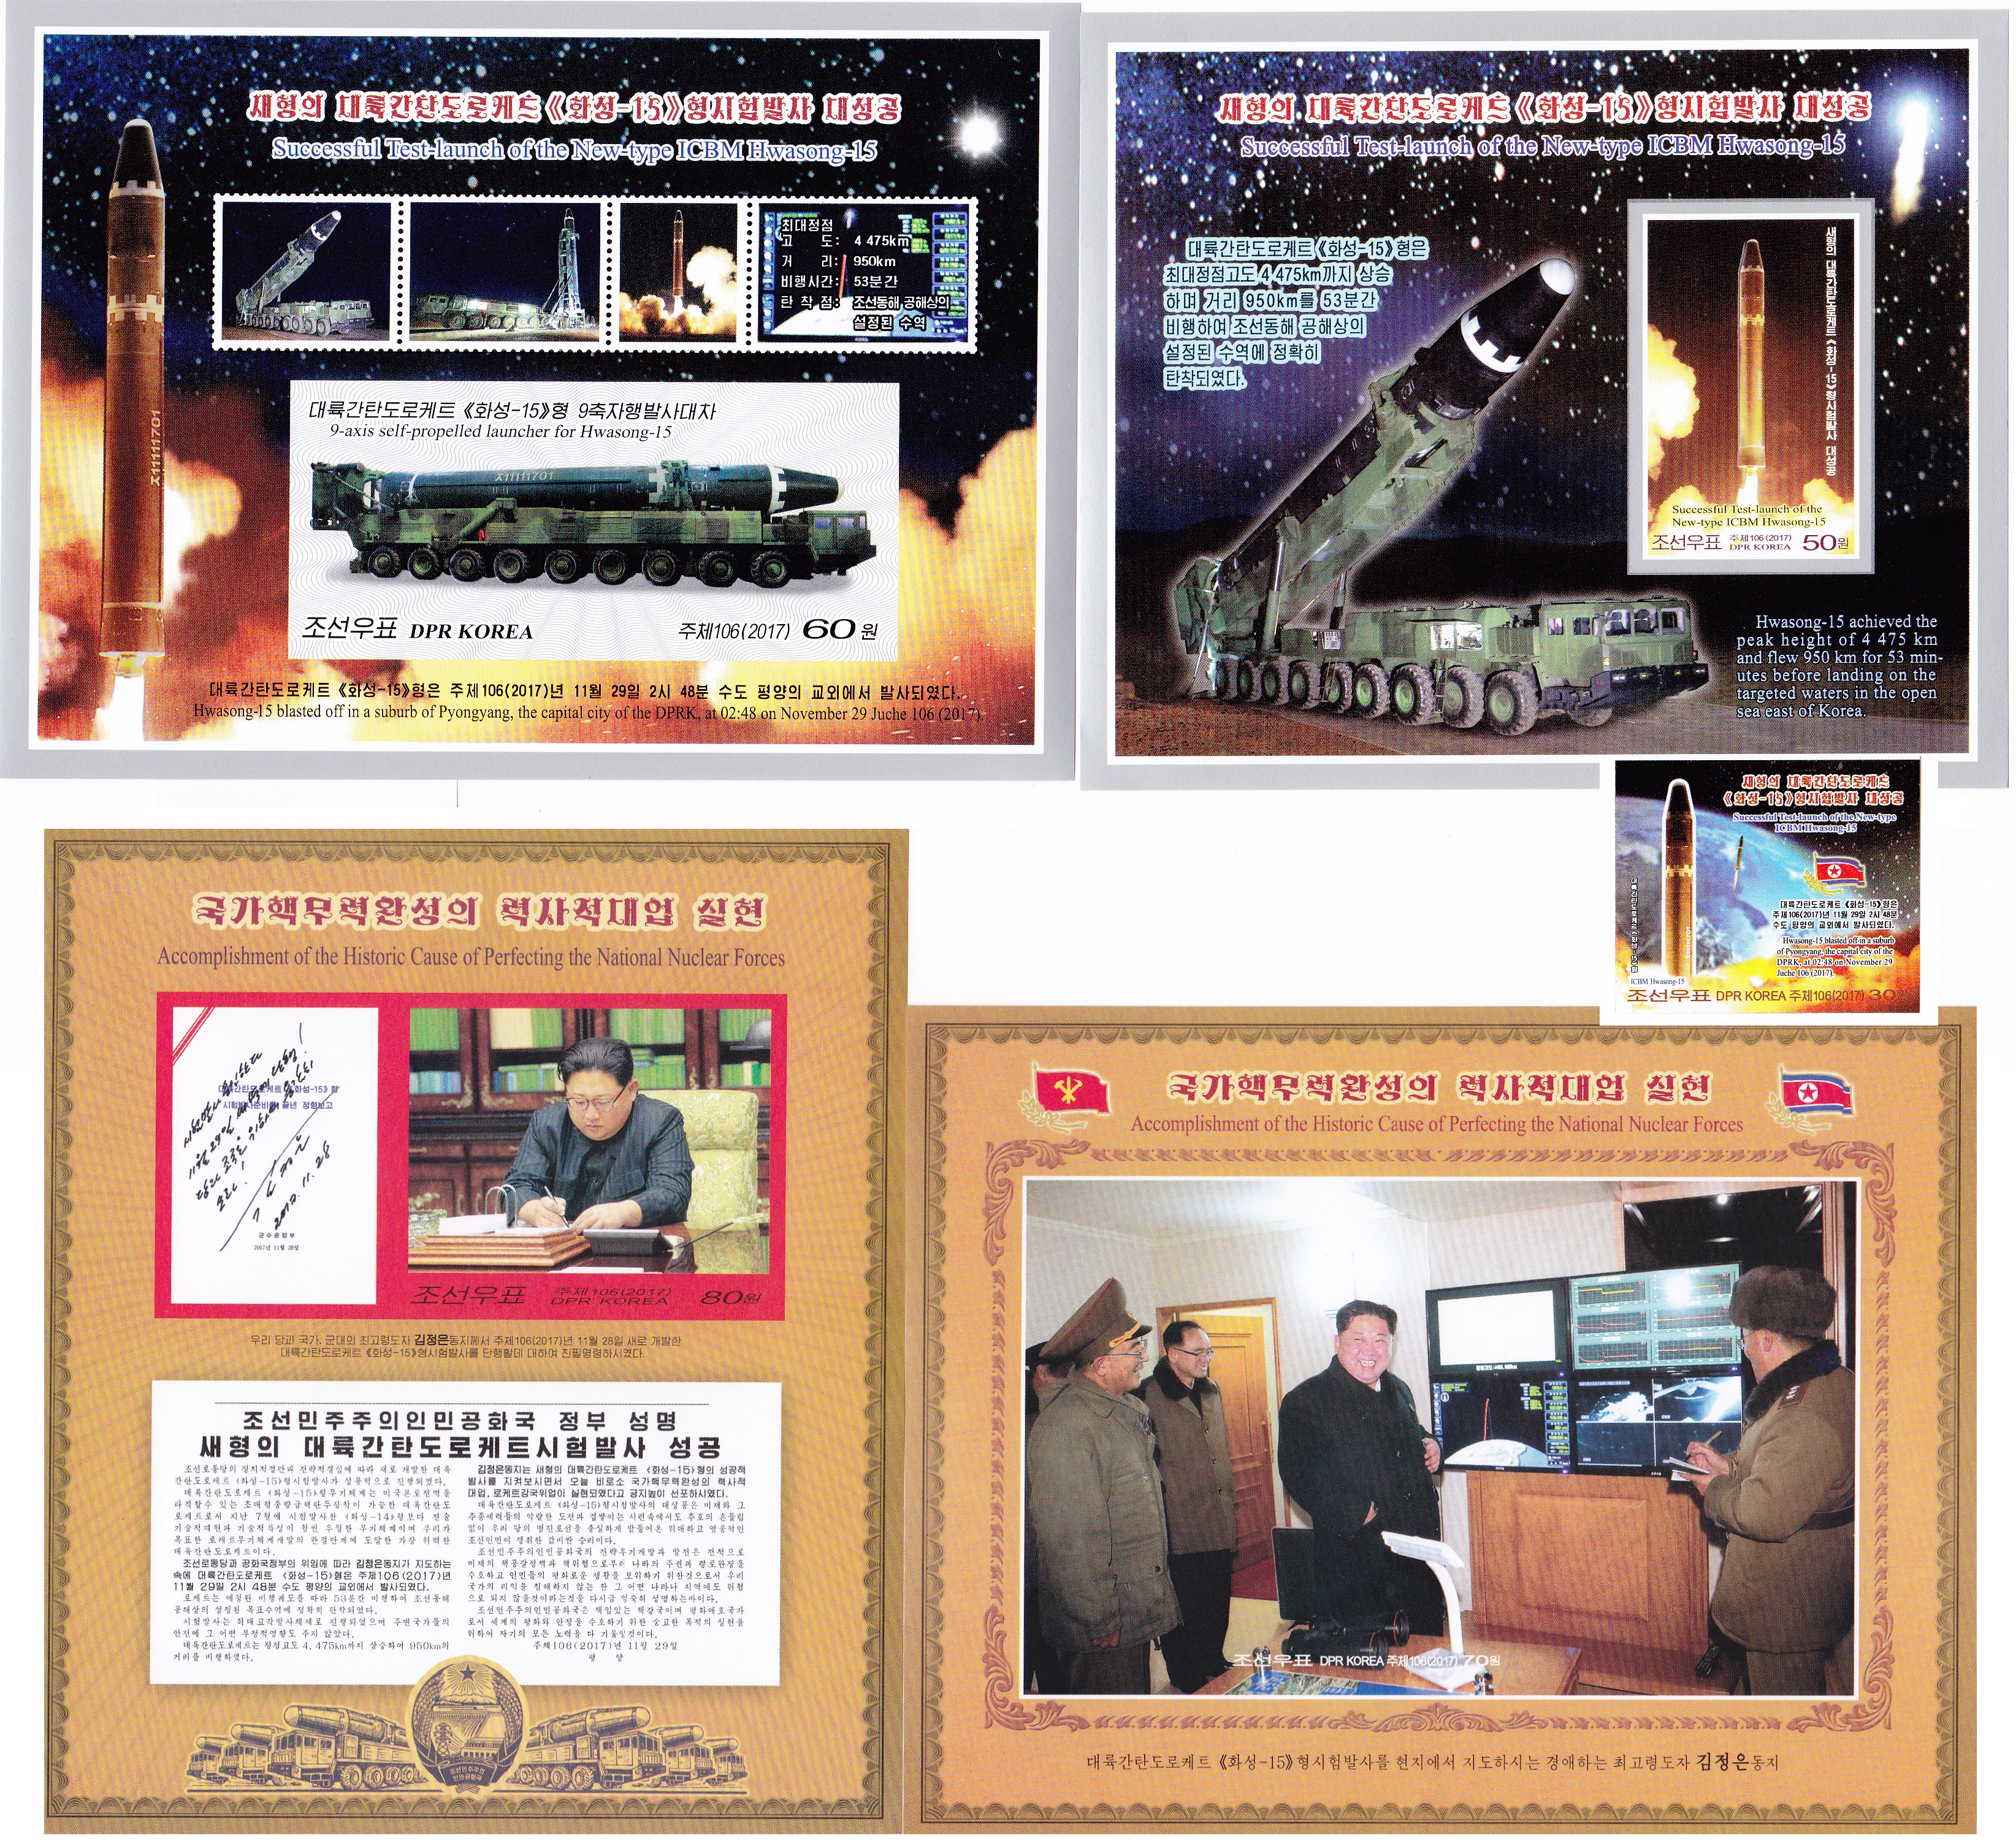 L9635, Korea "Launch Hwasong-15 Missile", 5 pcs First Day Cover Imperforate, 2017 - Click Image to Close